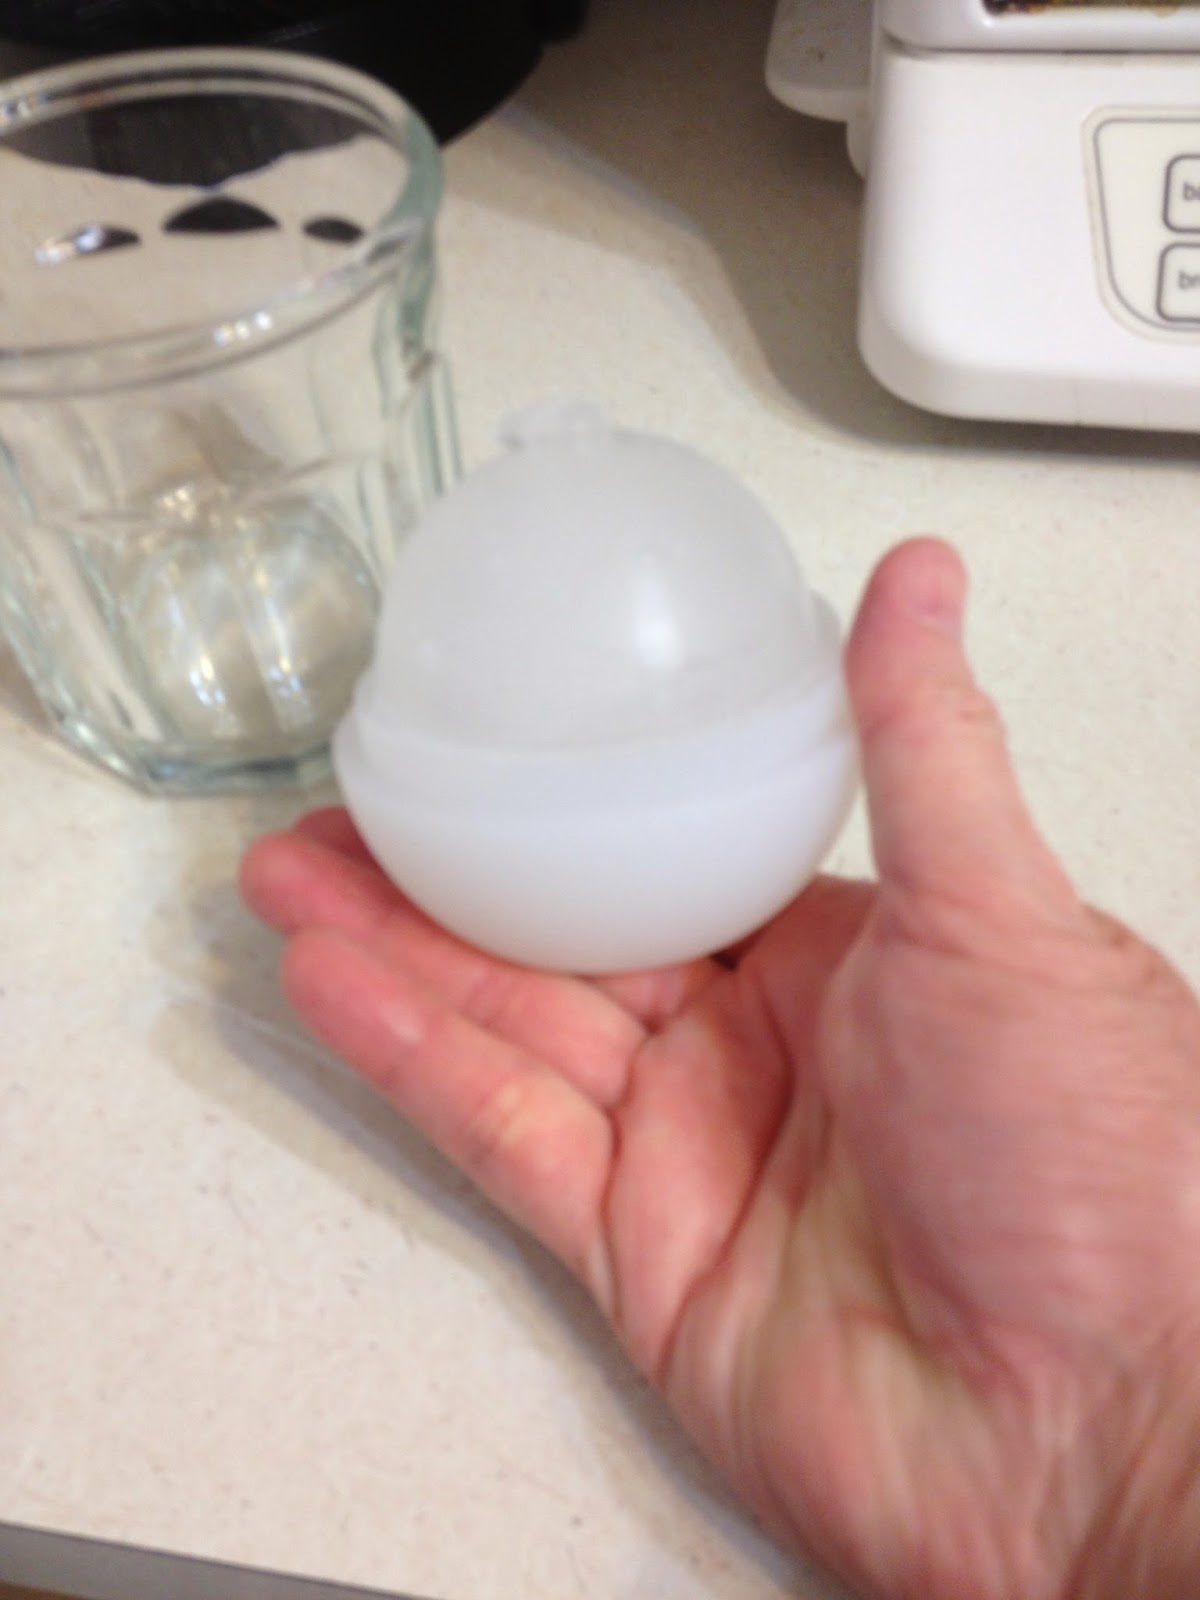 FL Mom's blog!: 2 Ice Ball Mold Review